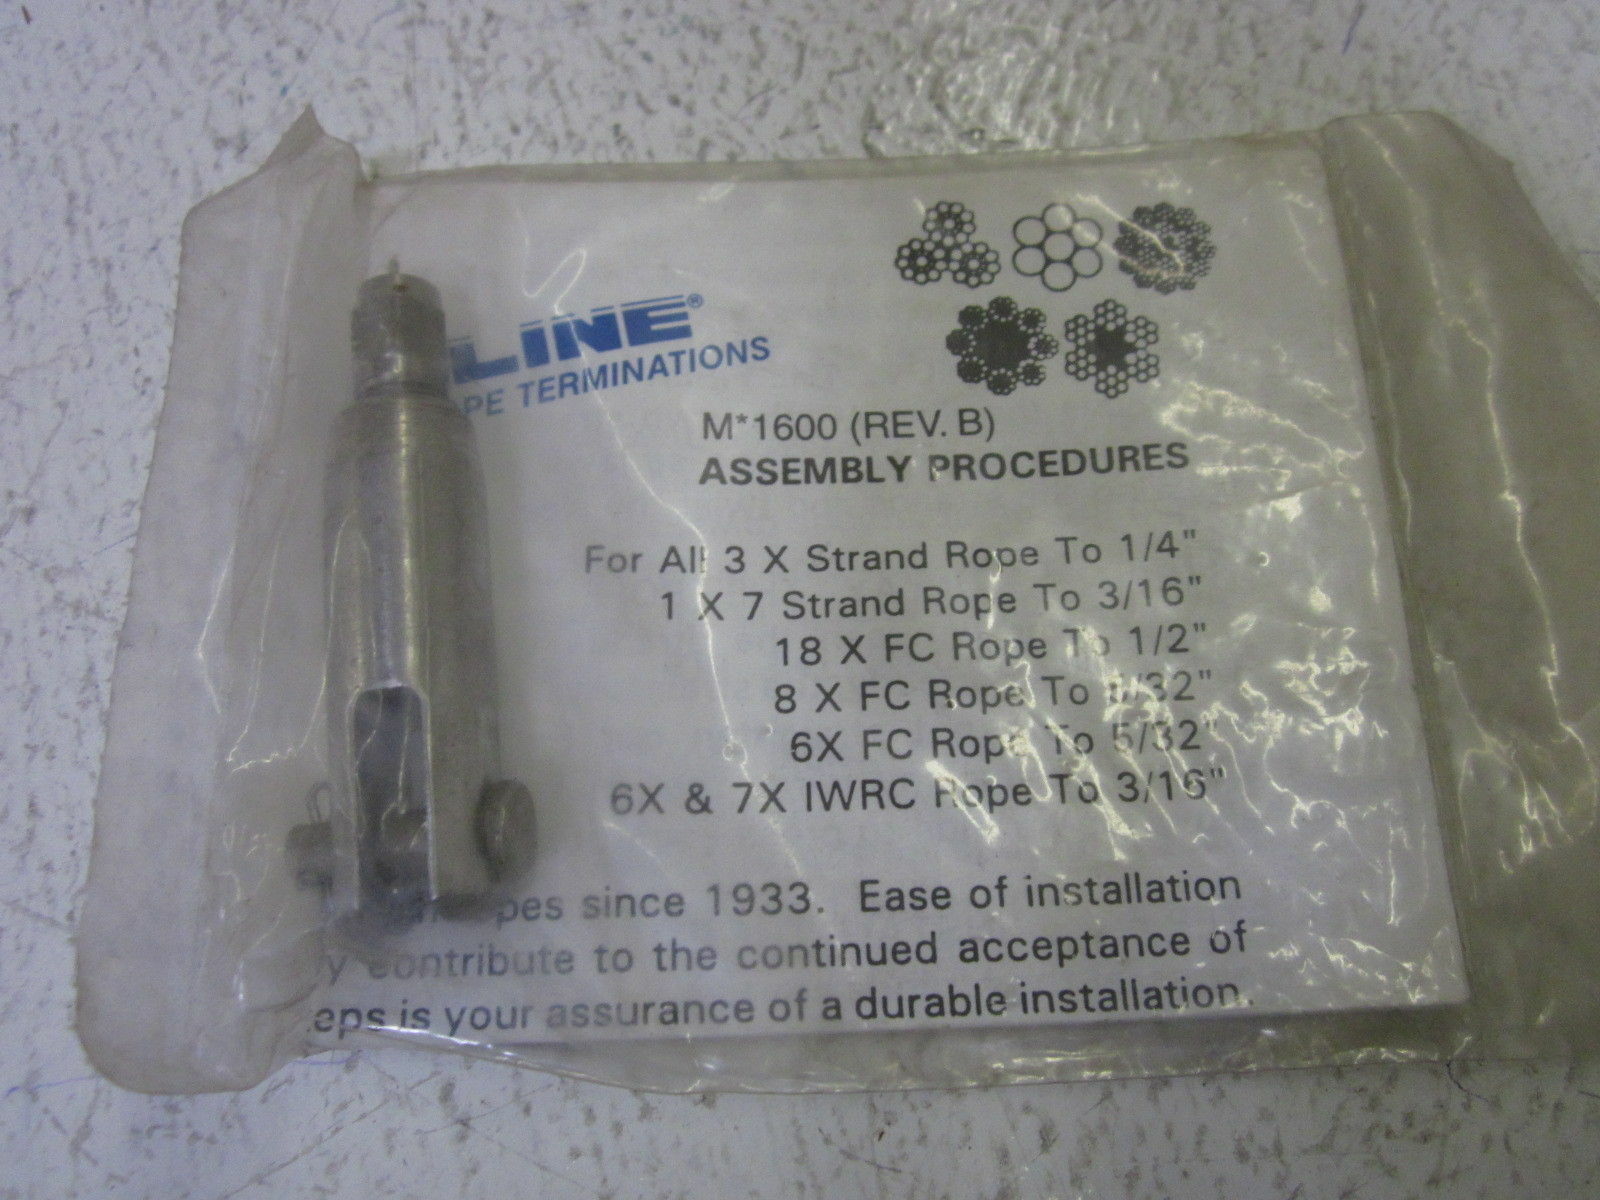 LOT OF 82 ELECTROLINE M*1600 (REV.B) *NEW IN A FACTORY BAG*